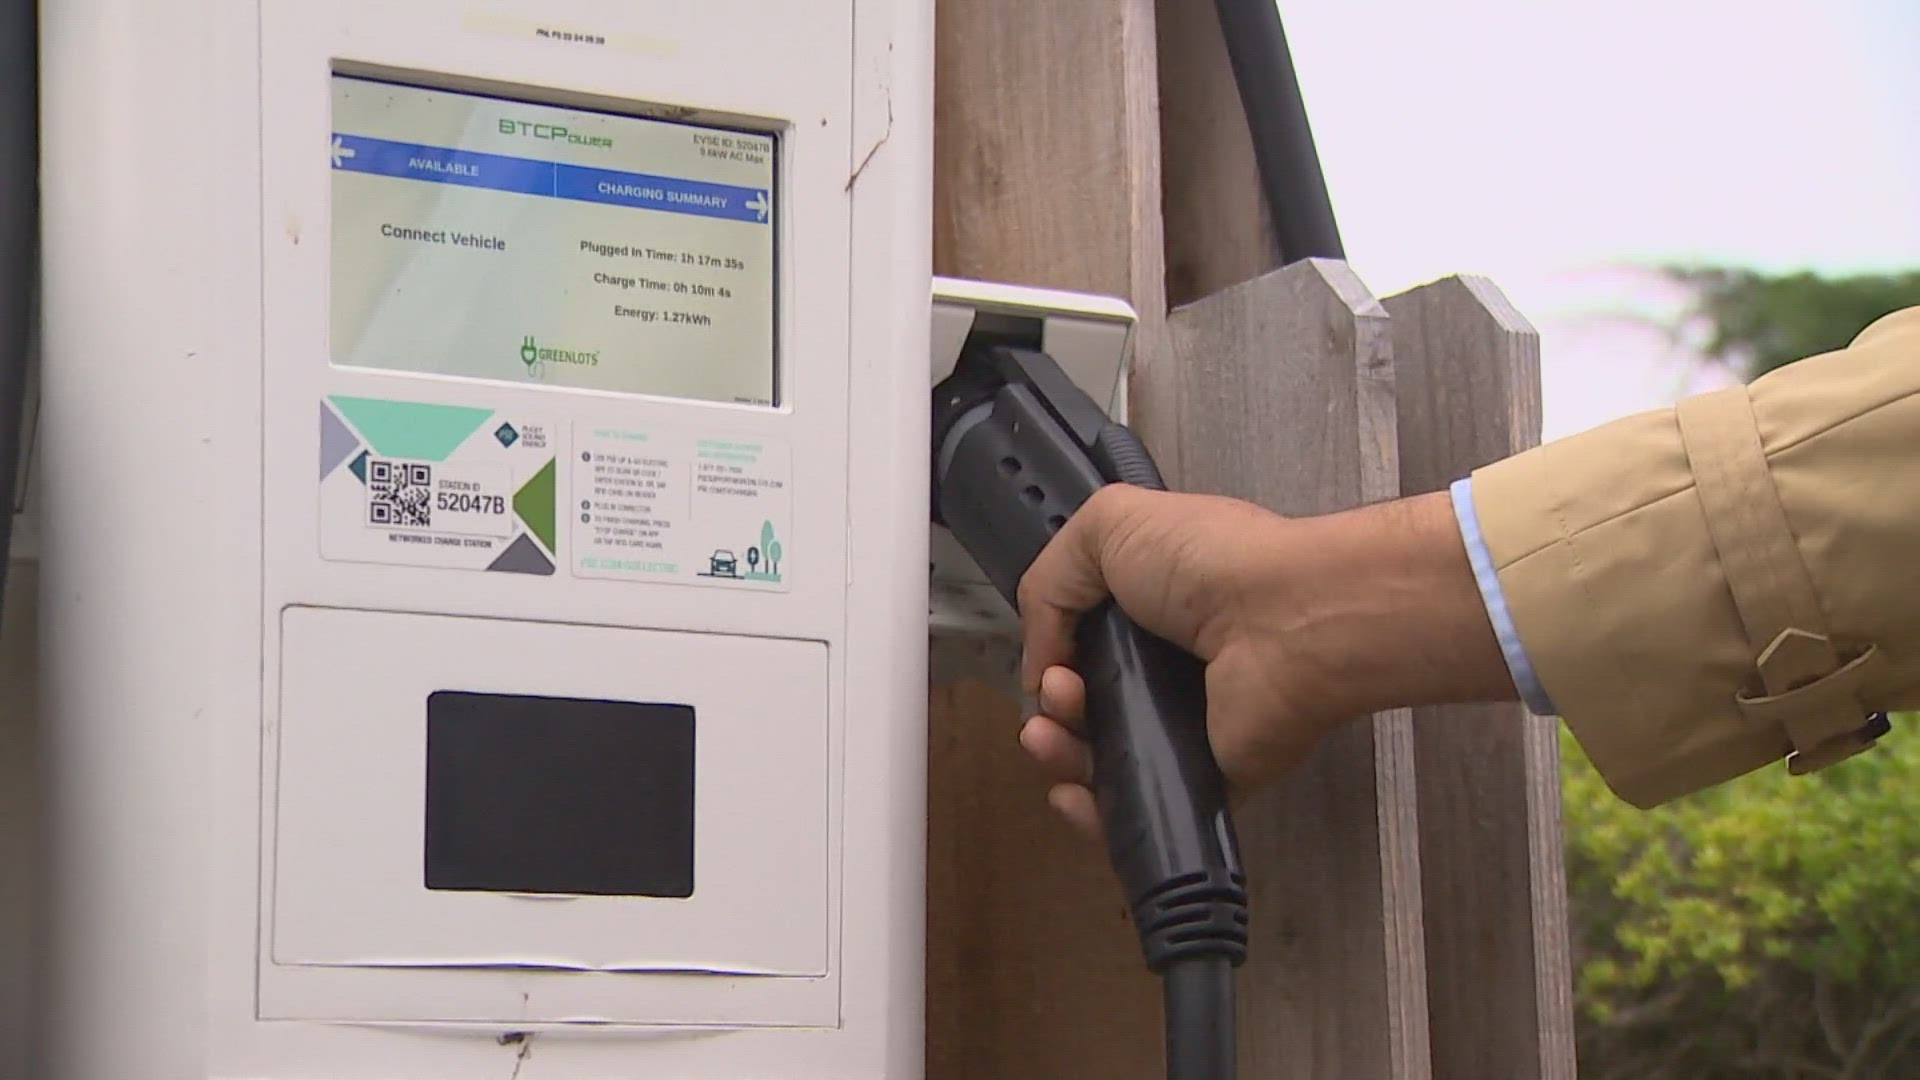 Puget Sound Energy's new program offers EV charging station installation and maintenance paid for by PSE for some small to medium-sized businesses